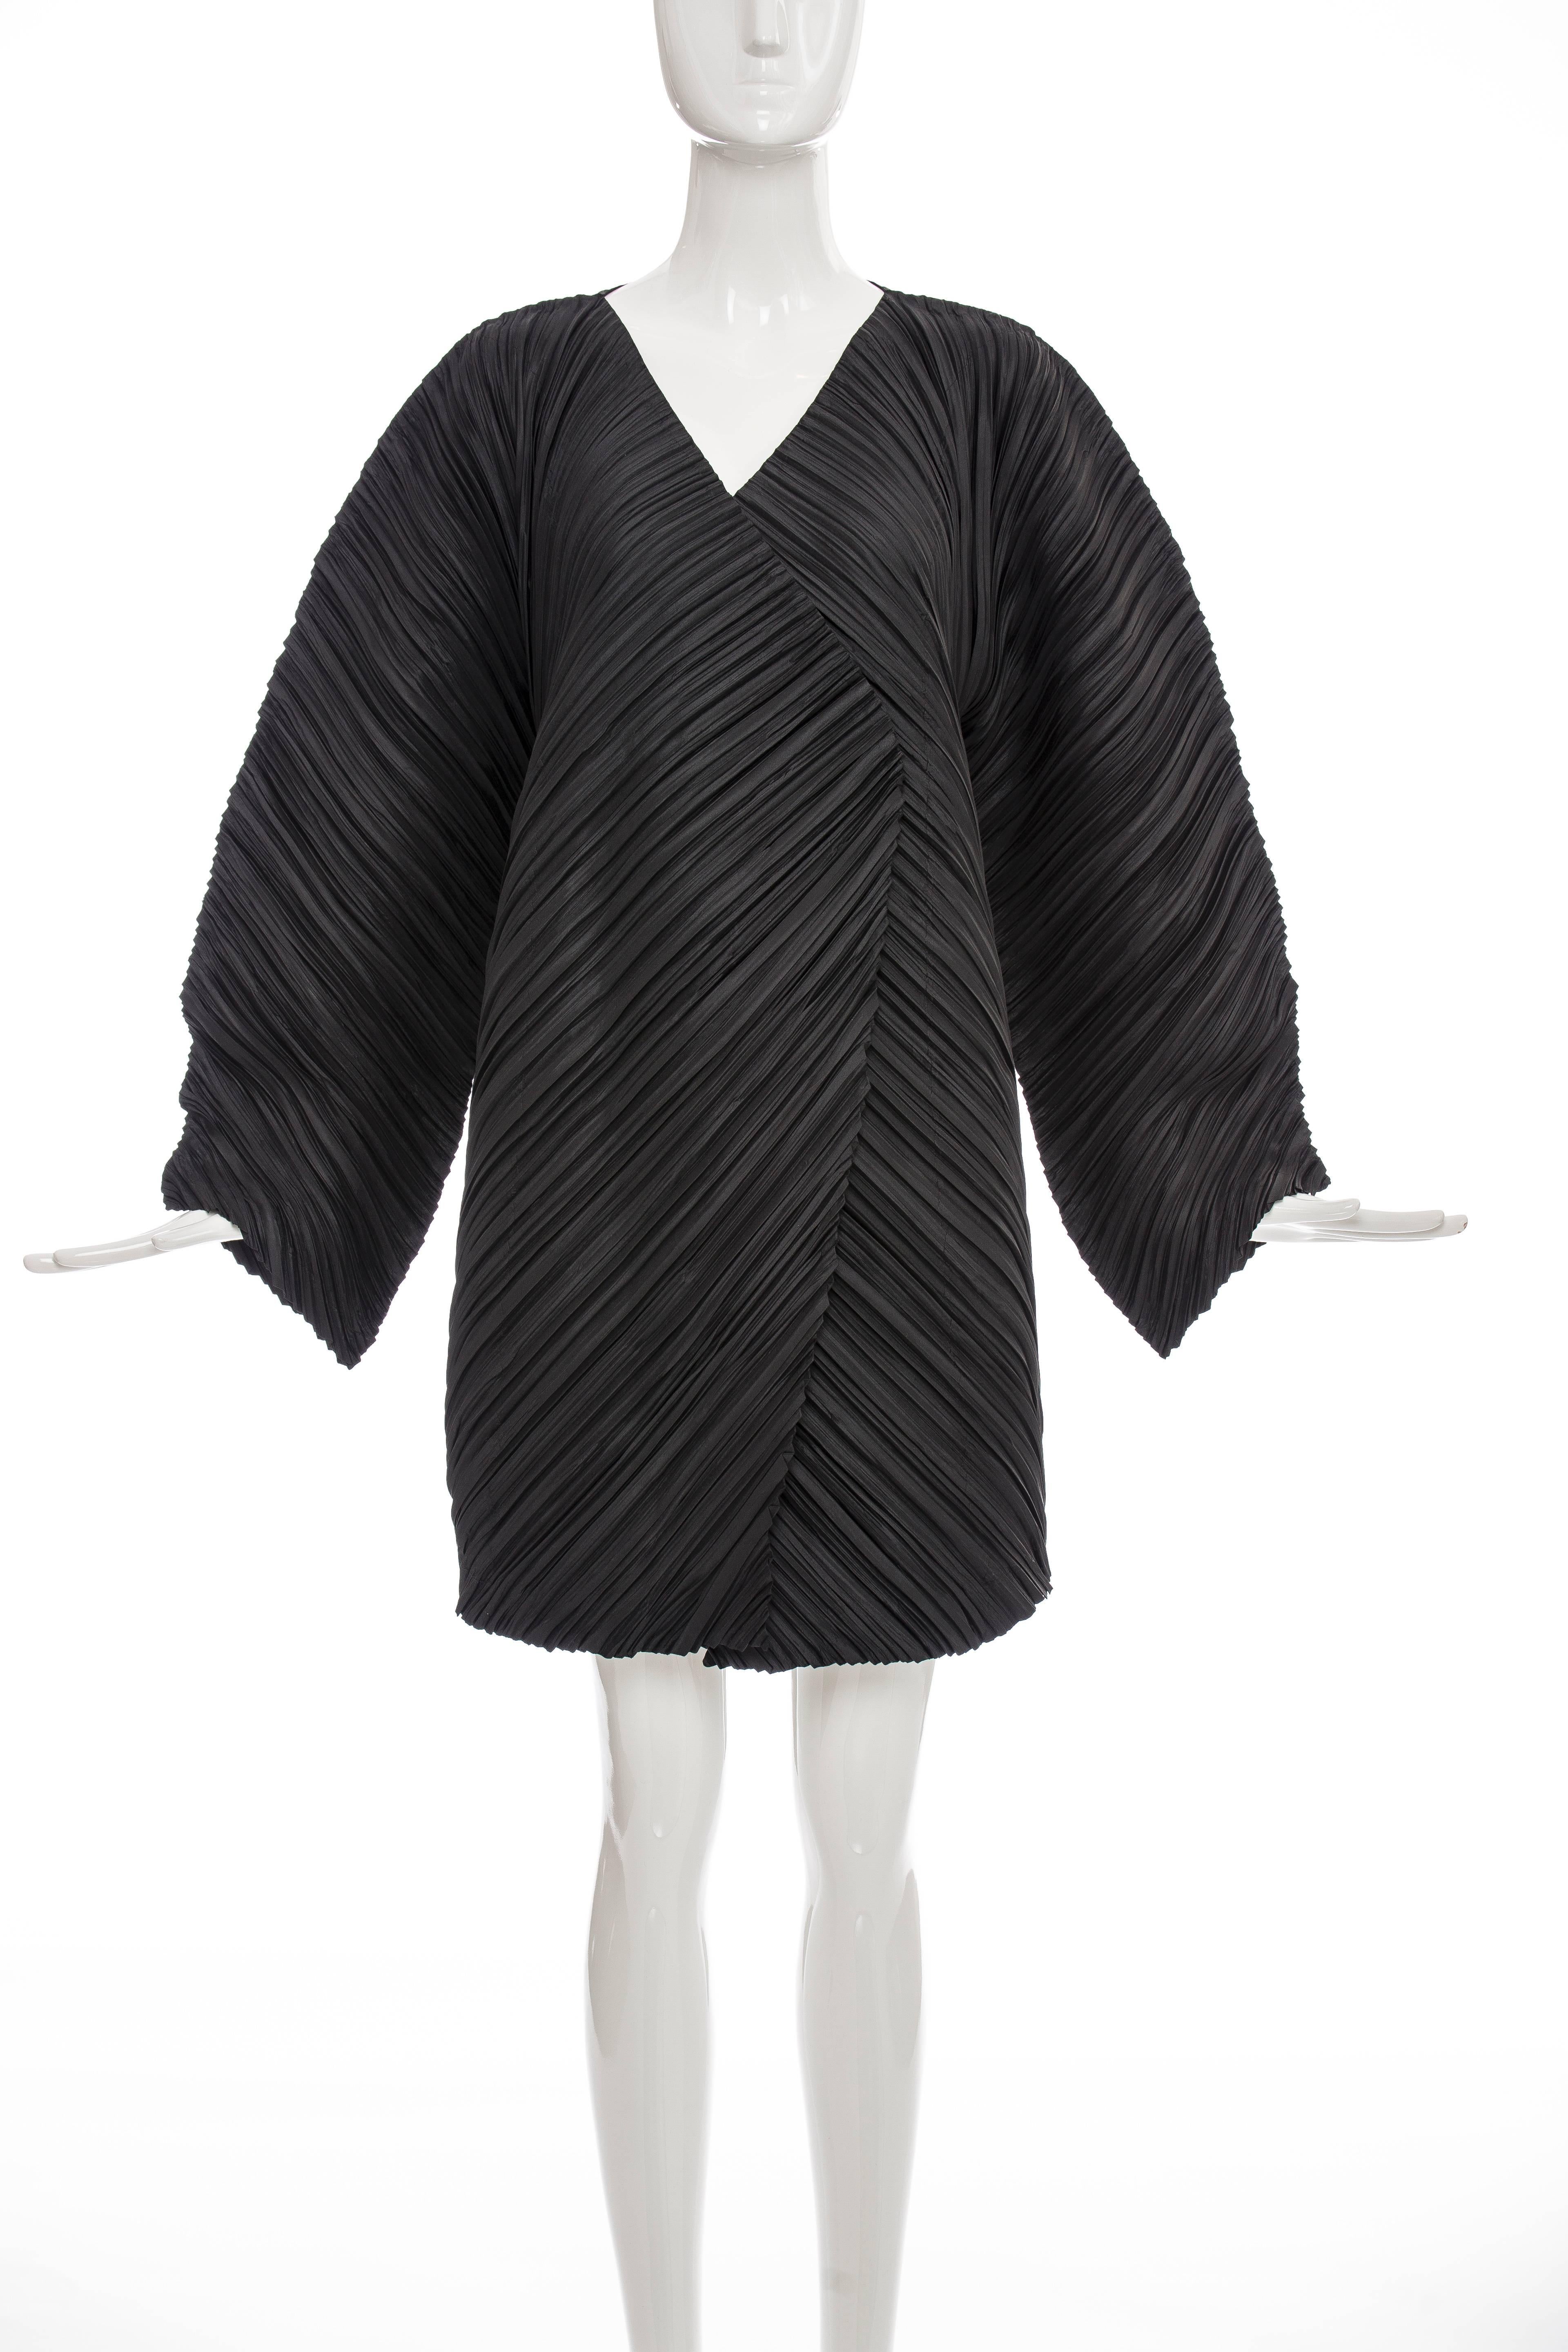 Issey Miyake, Spring 1995 black pleated polyester cocoon jacket with black on white woven label.